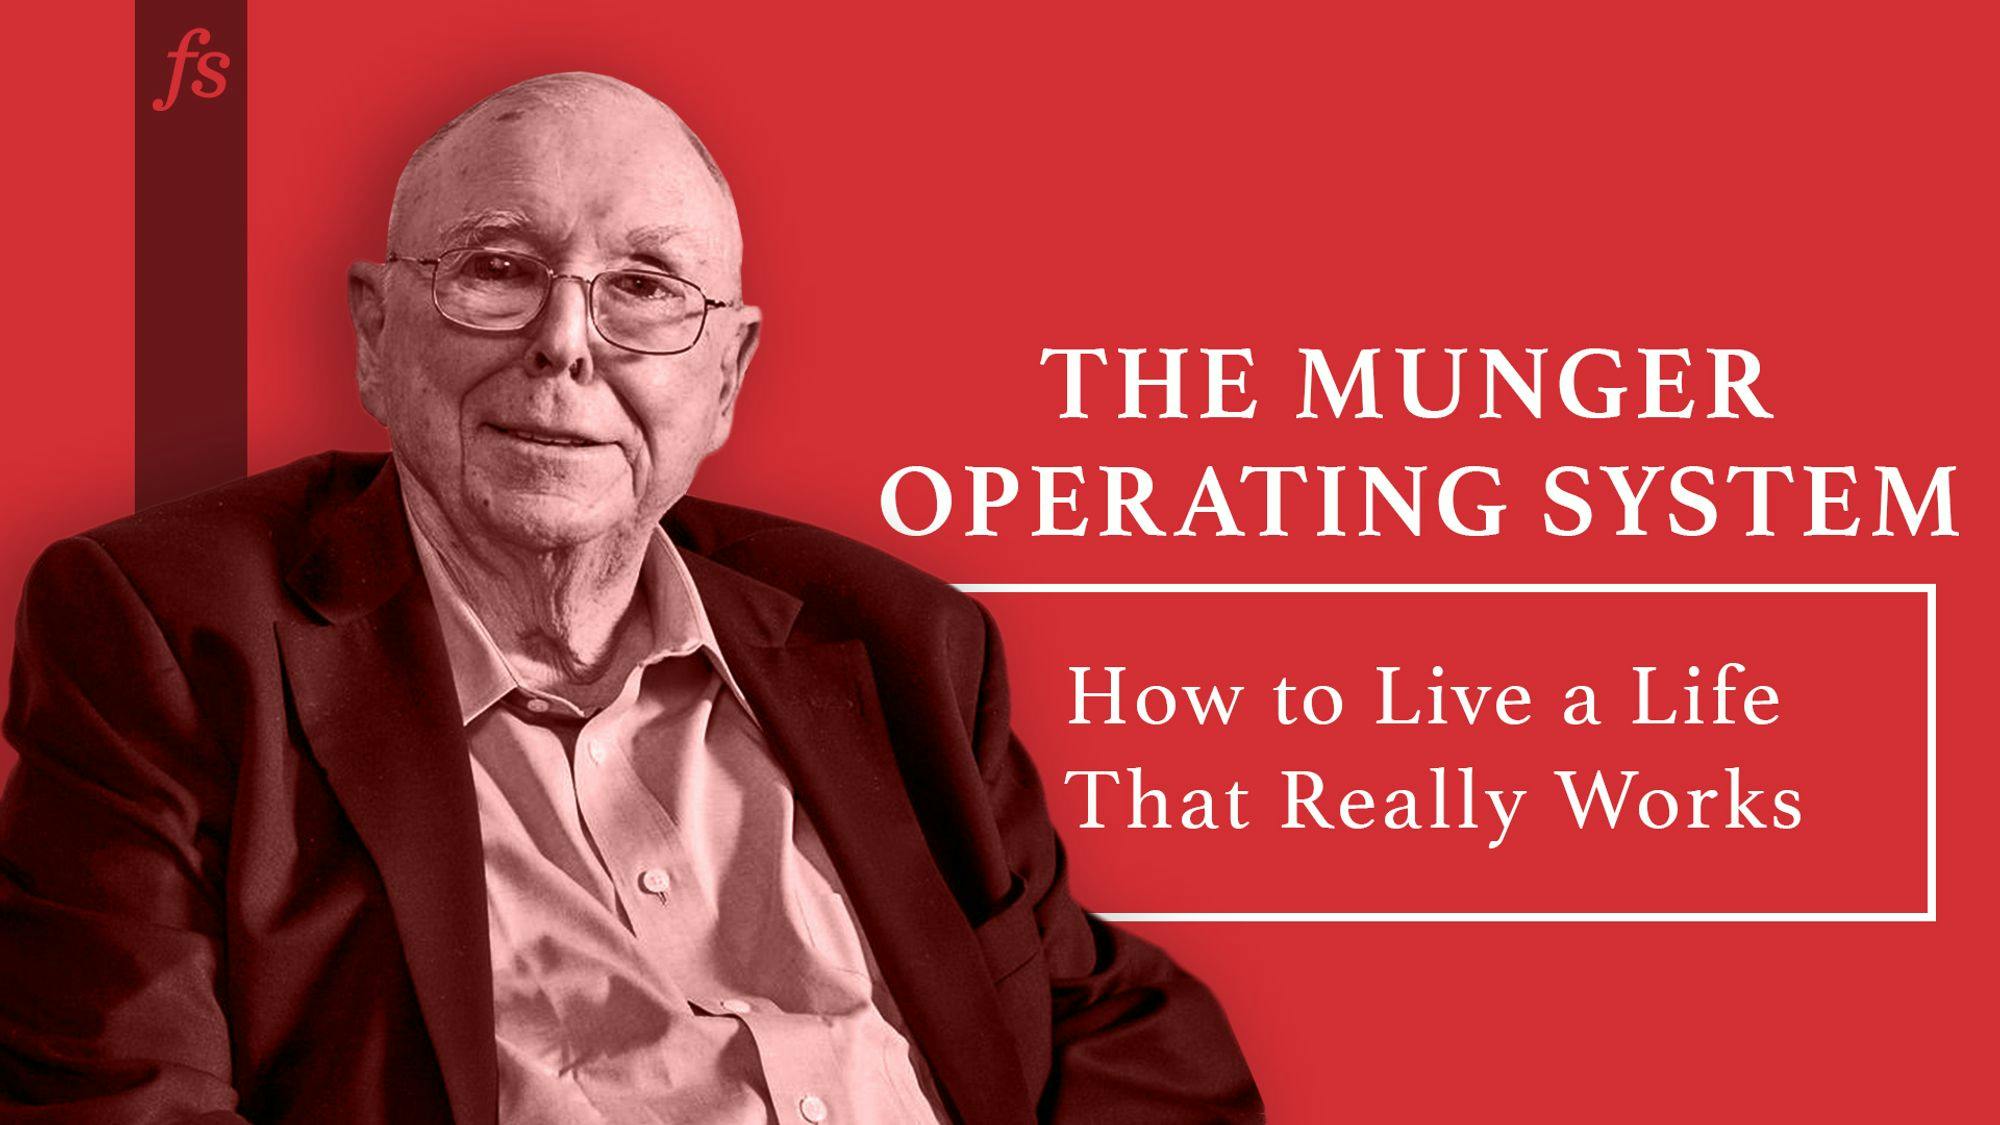 The Munger Operating System: A Life That Works